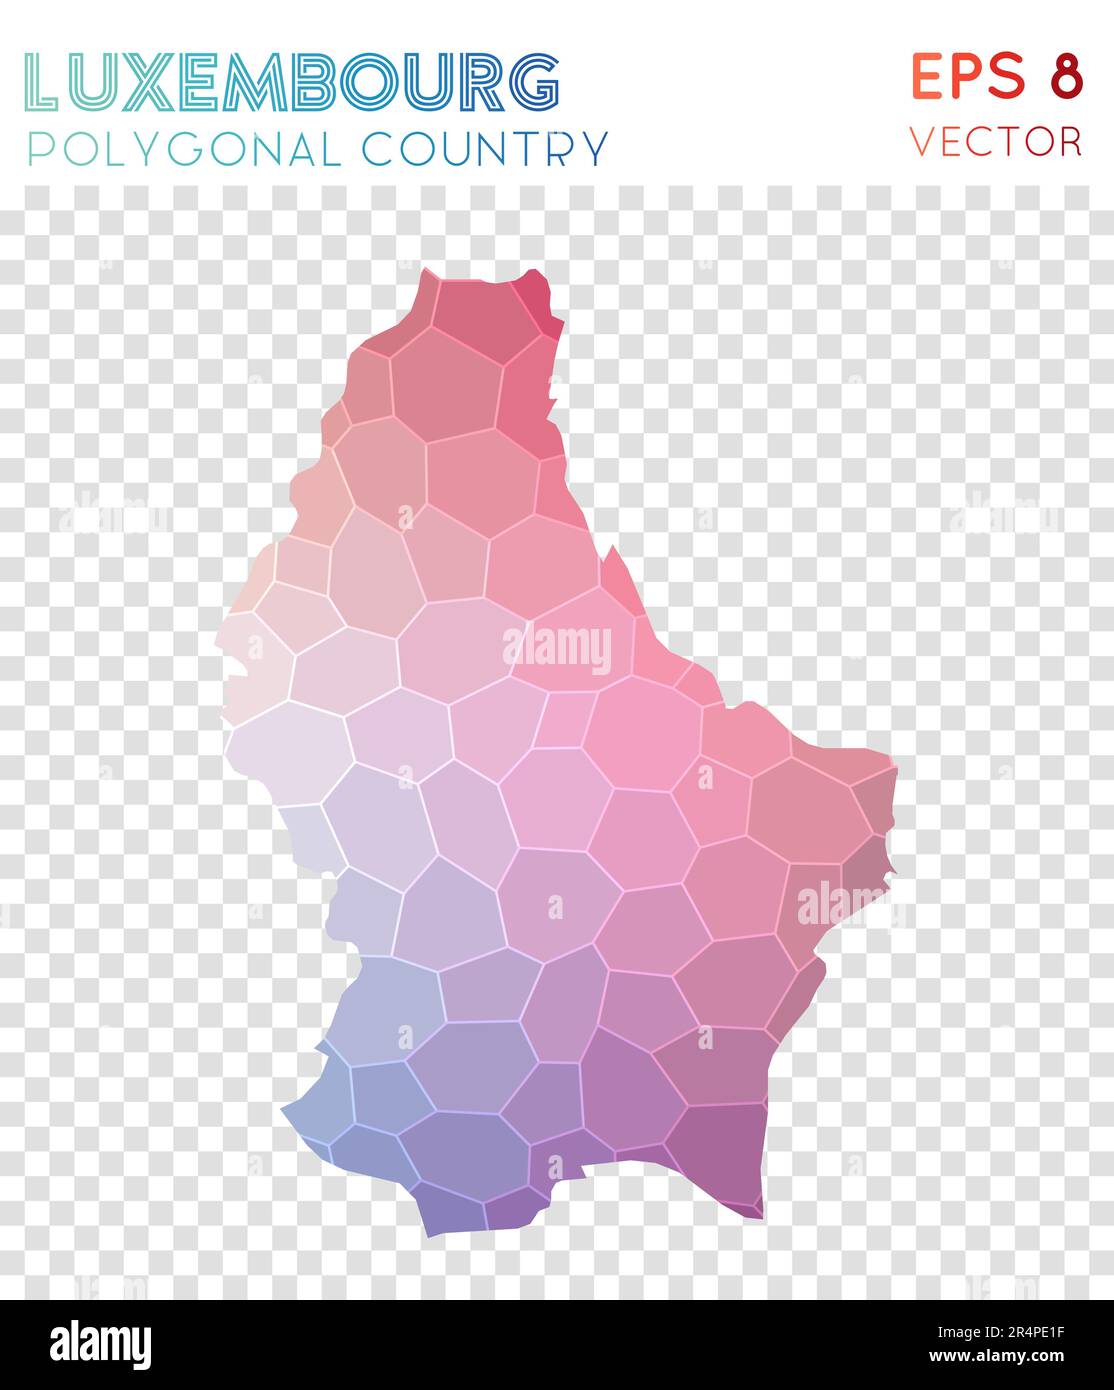 Luxembourg polygonal map, mosaic style country. Quaint low poly style, modern design. Luxembourg polygonal map for infographics or presentation. Stock Vector